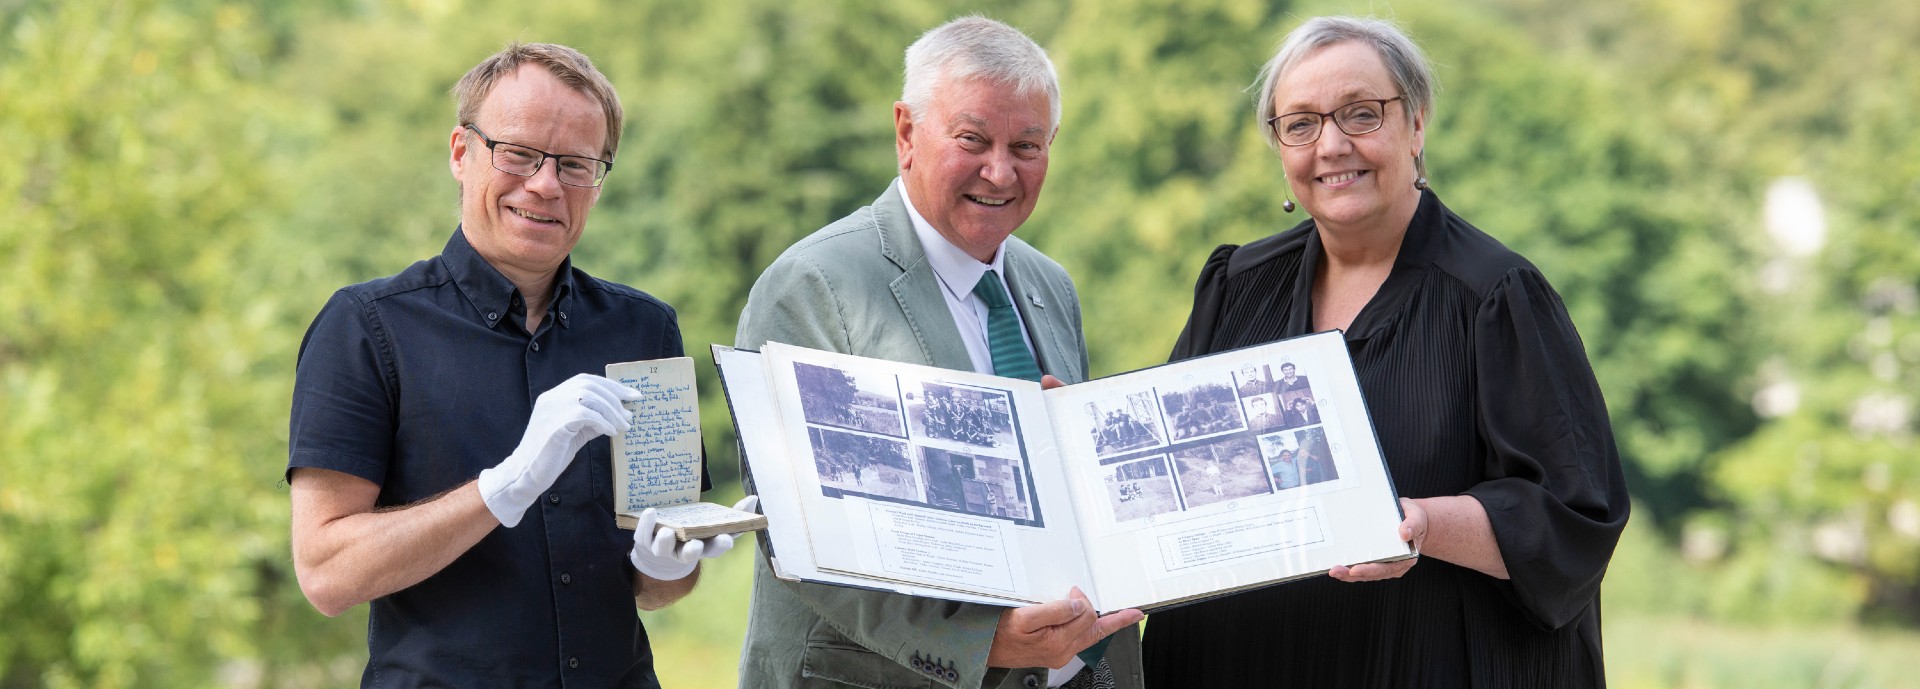 Karl Magee, Ron Aitchison and SallyAnn Kelly pose with items from the new archive